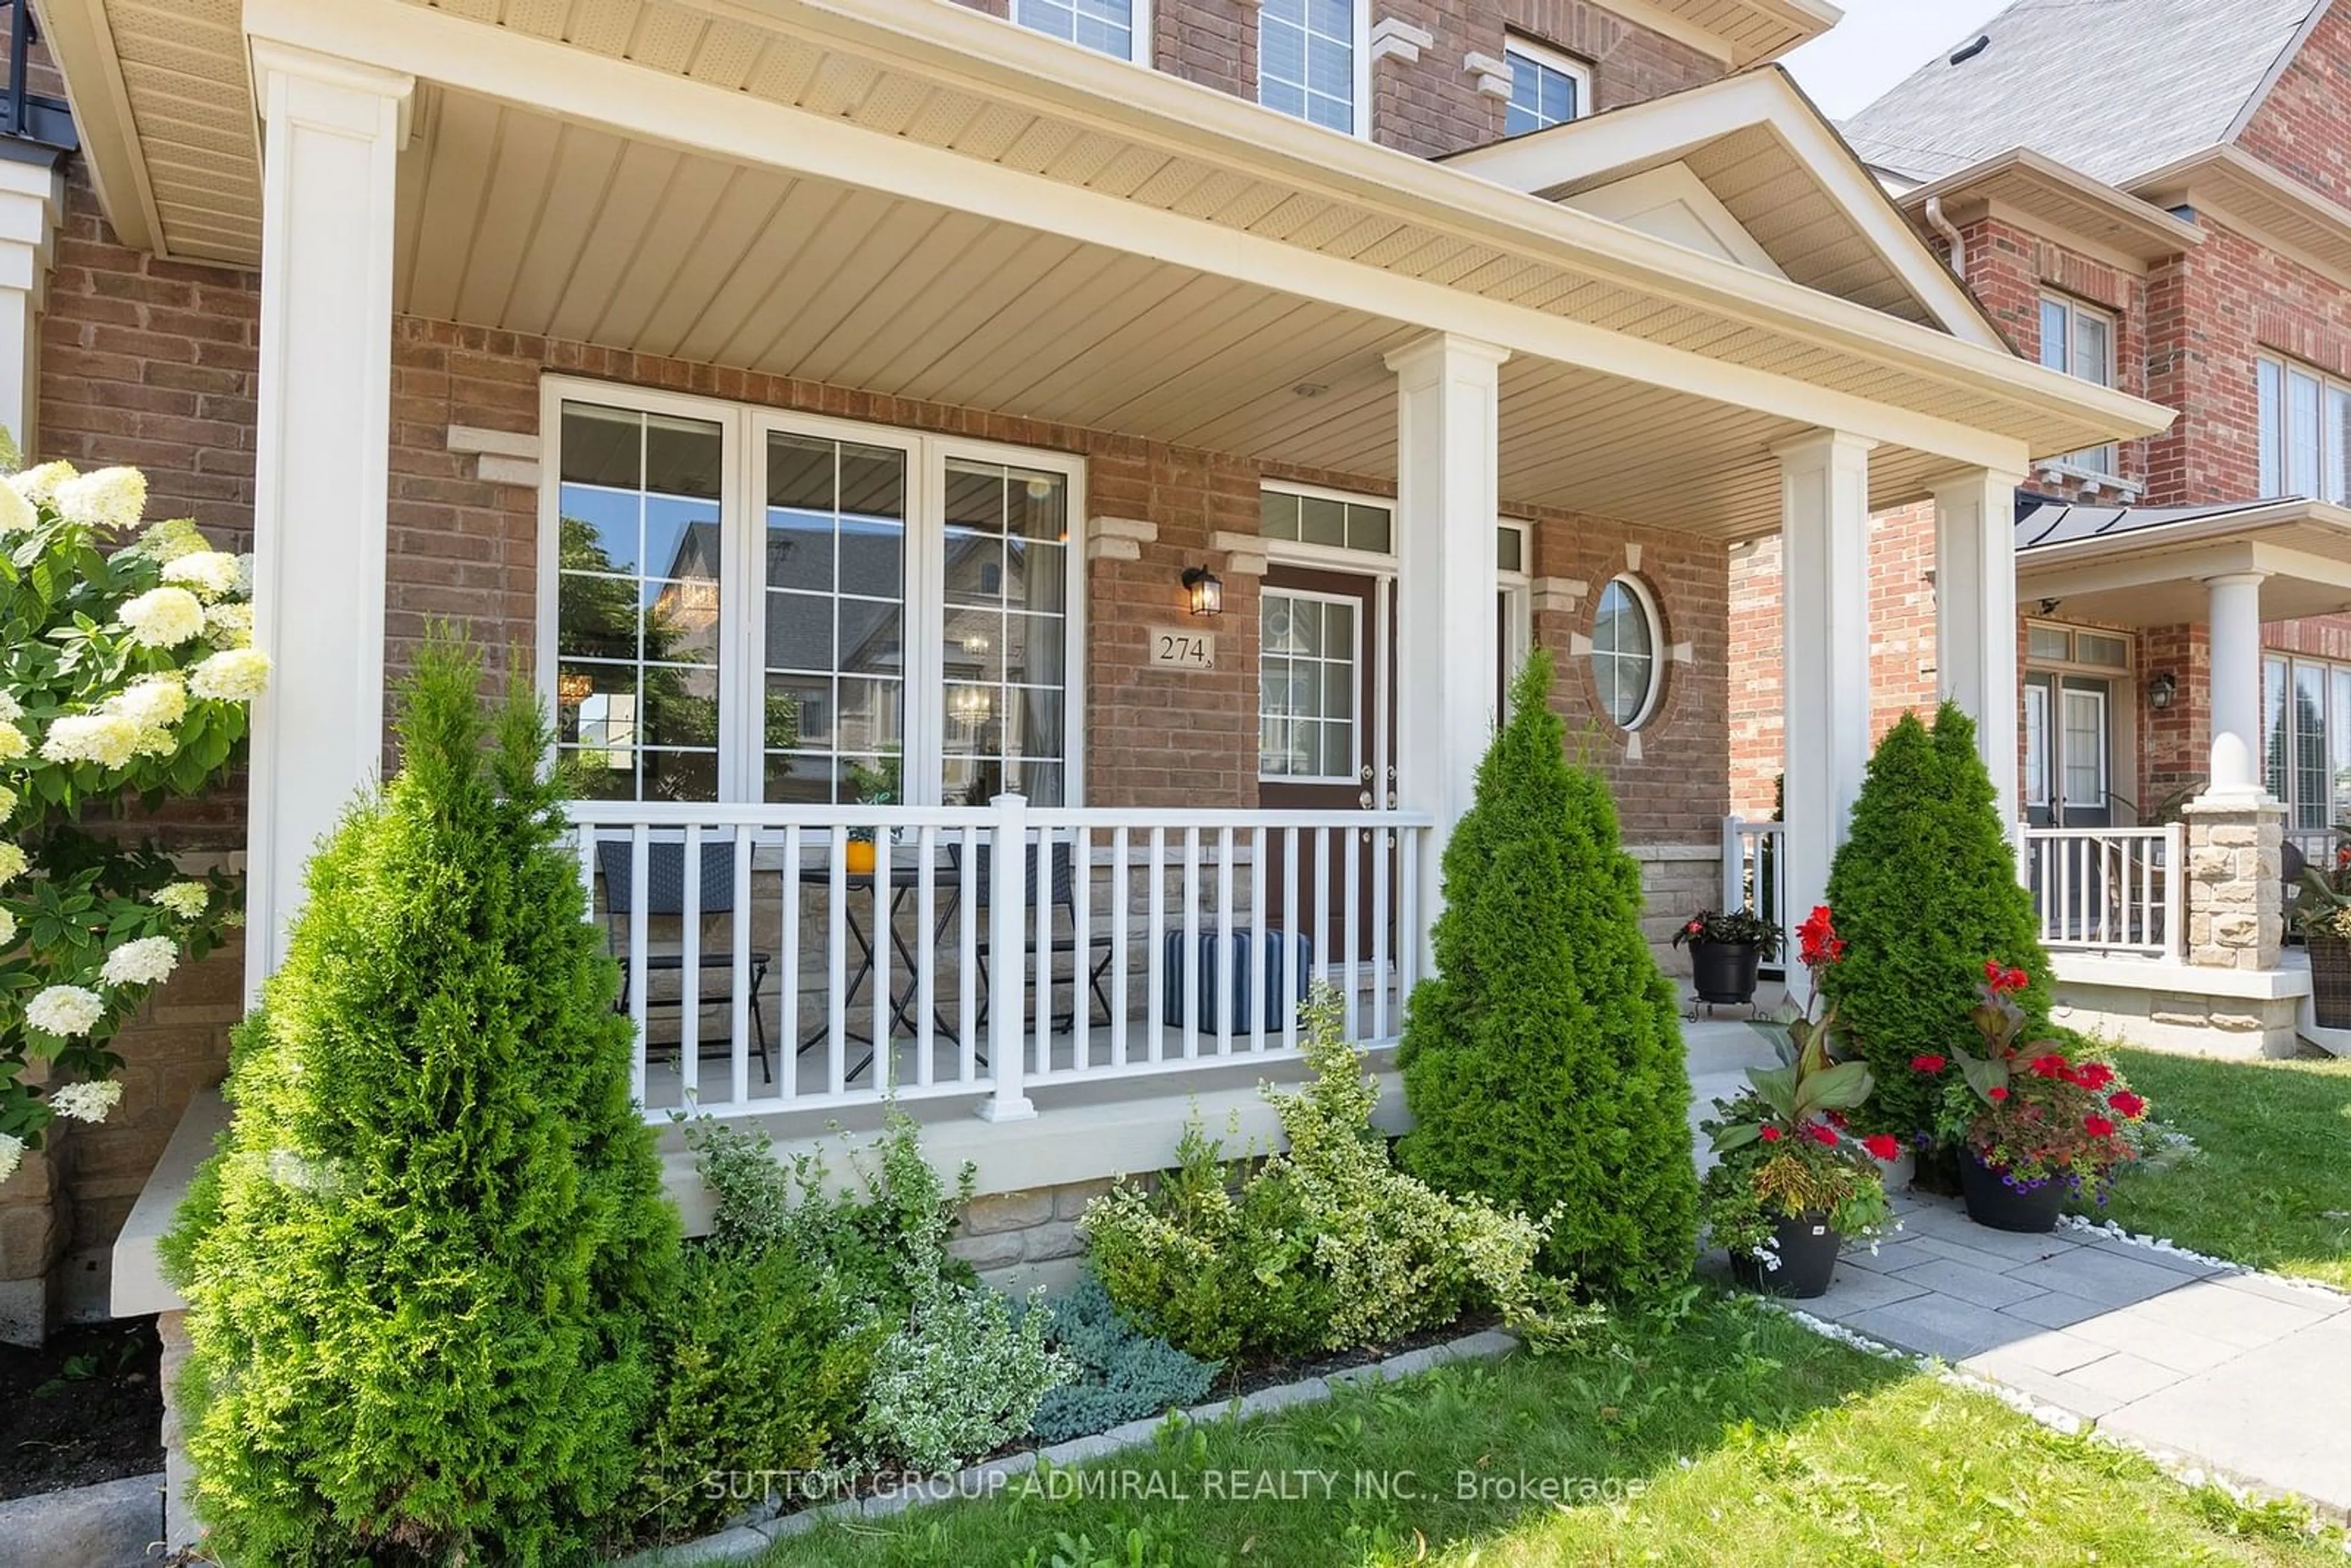 Home with brick exterior material for 274 Barons St, Vaughan Ontario L4H 3Z3